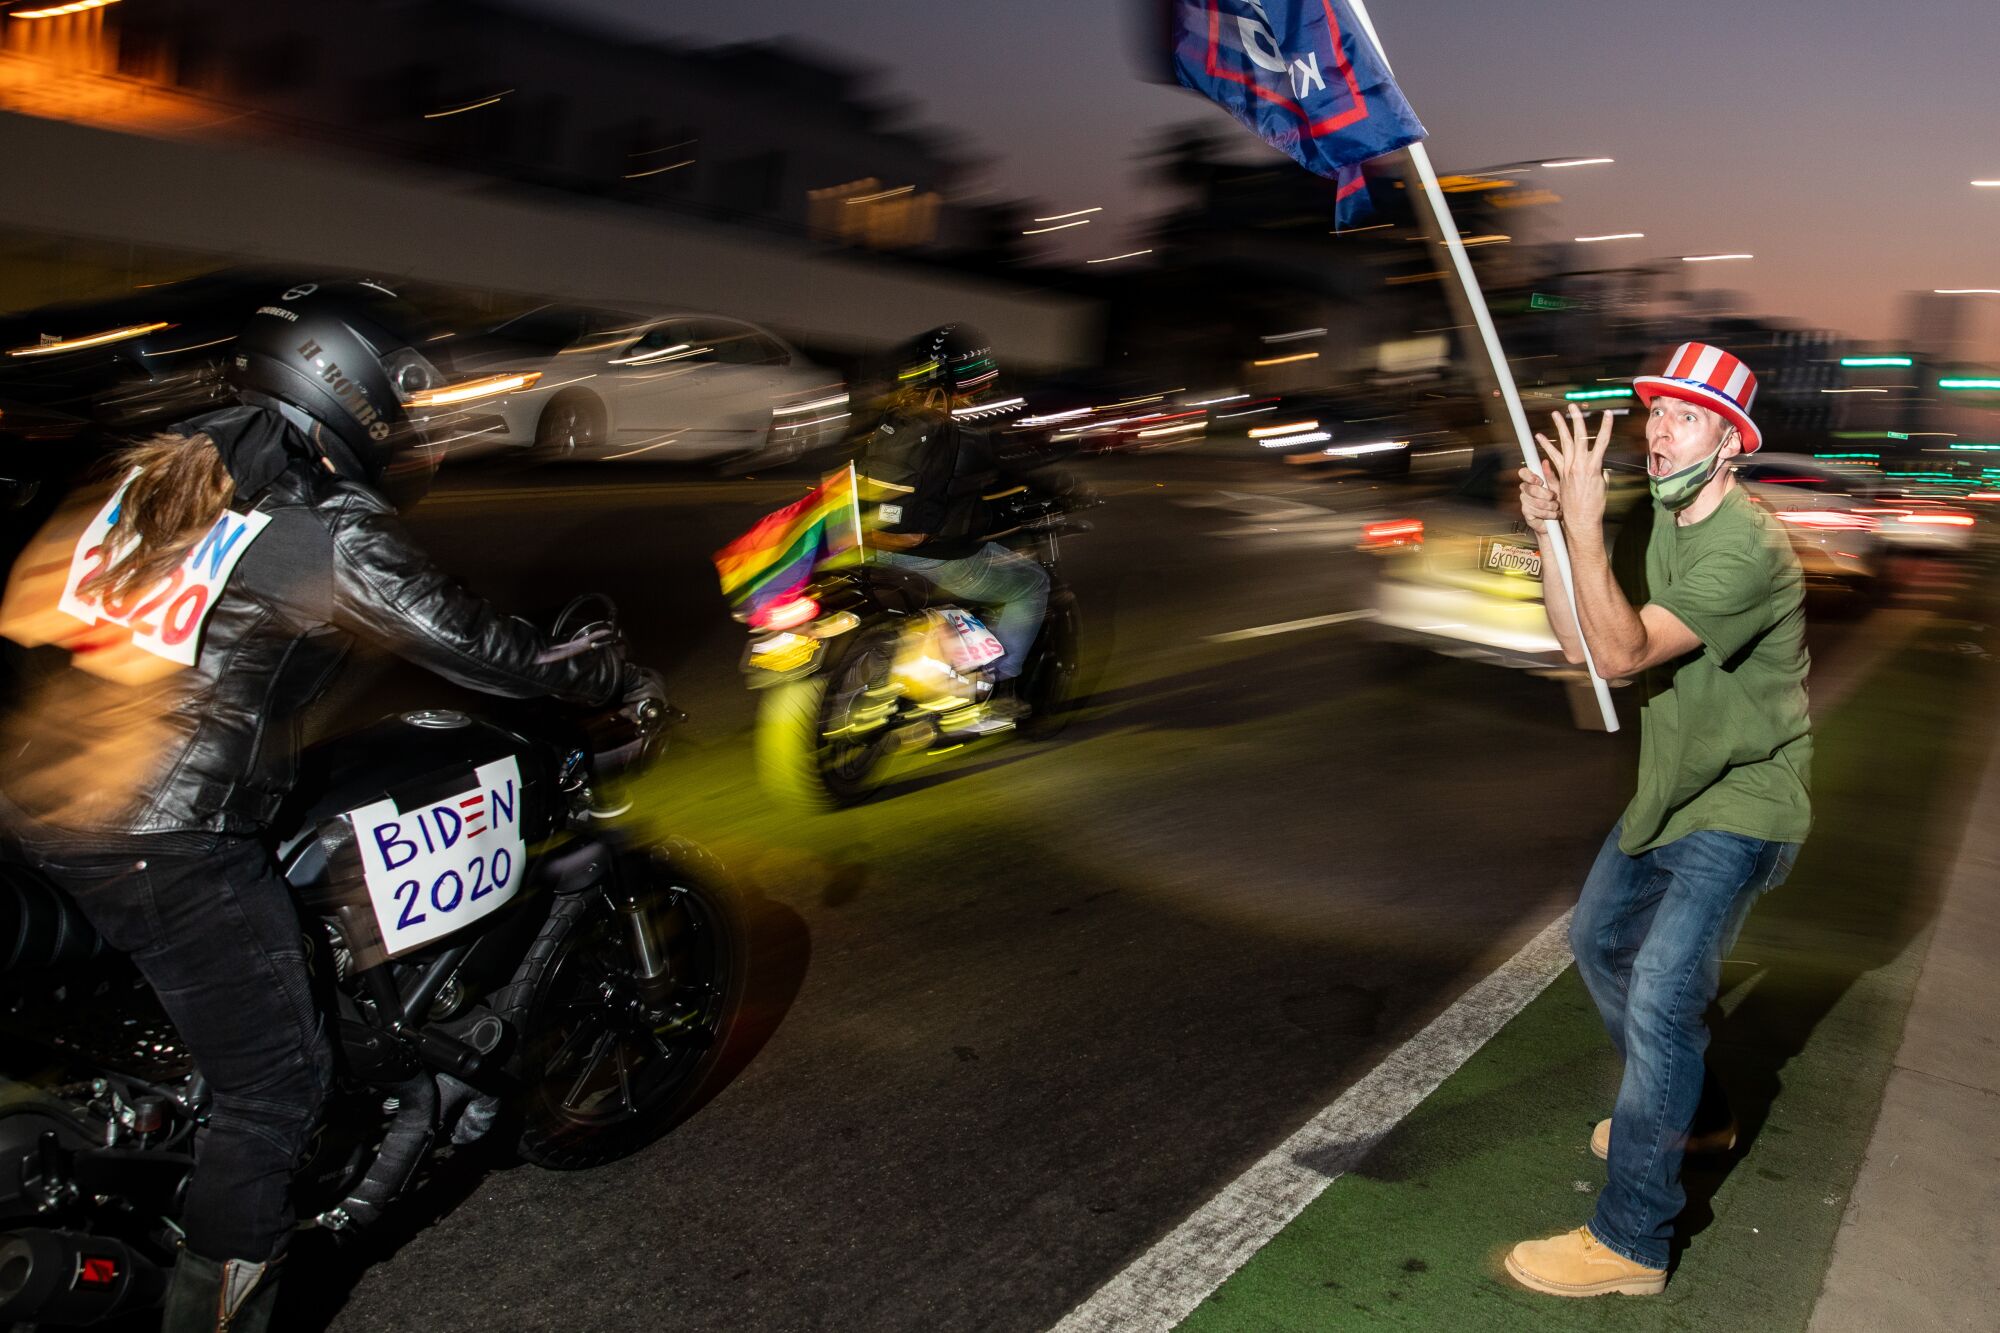 A supporter of President Trump waves a flag as Joe Biden supporters ride by on motorcycles in Beverly Hills